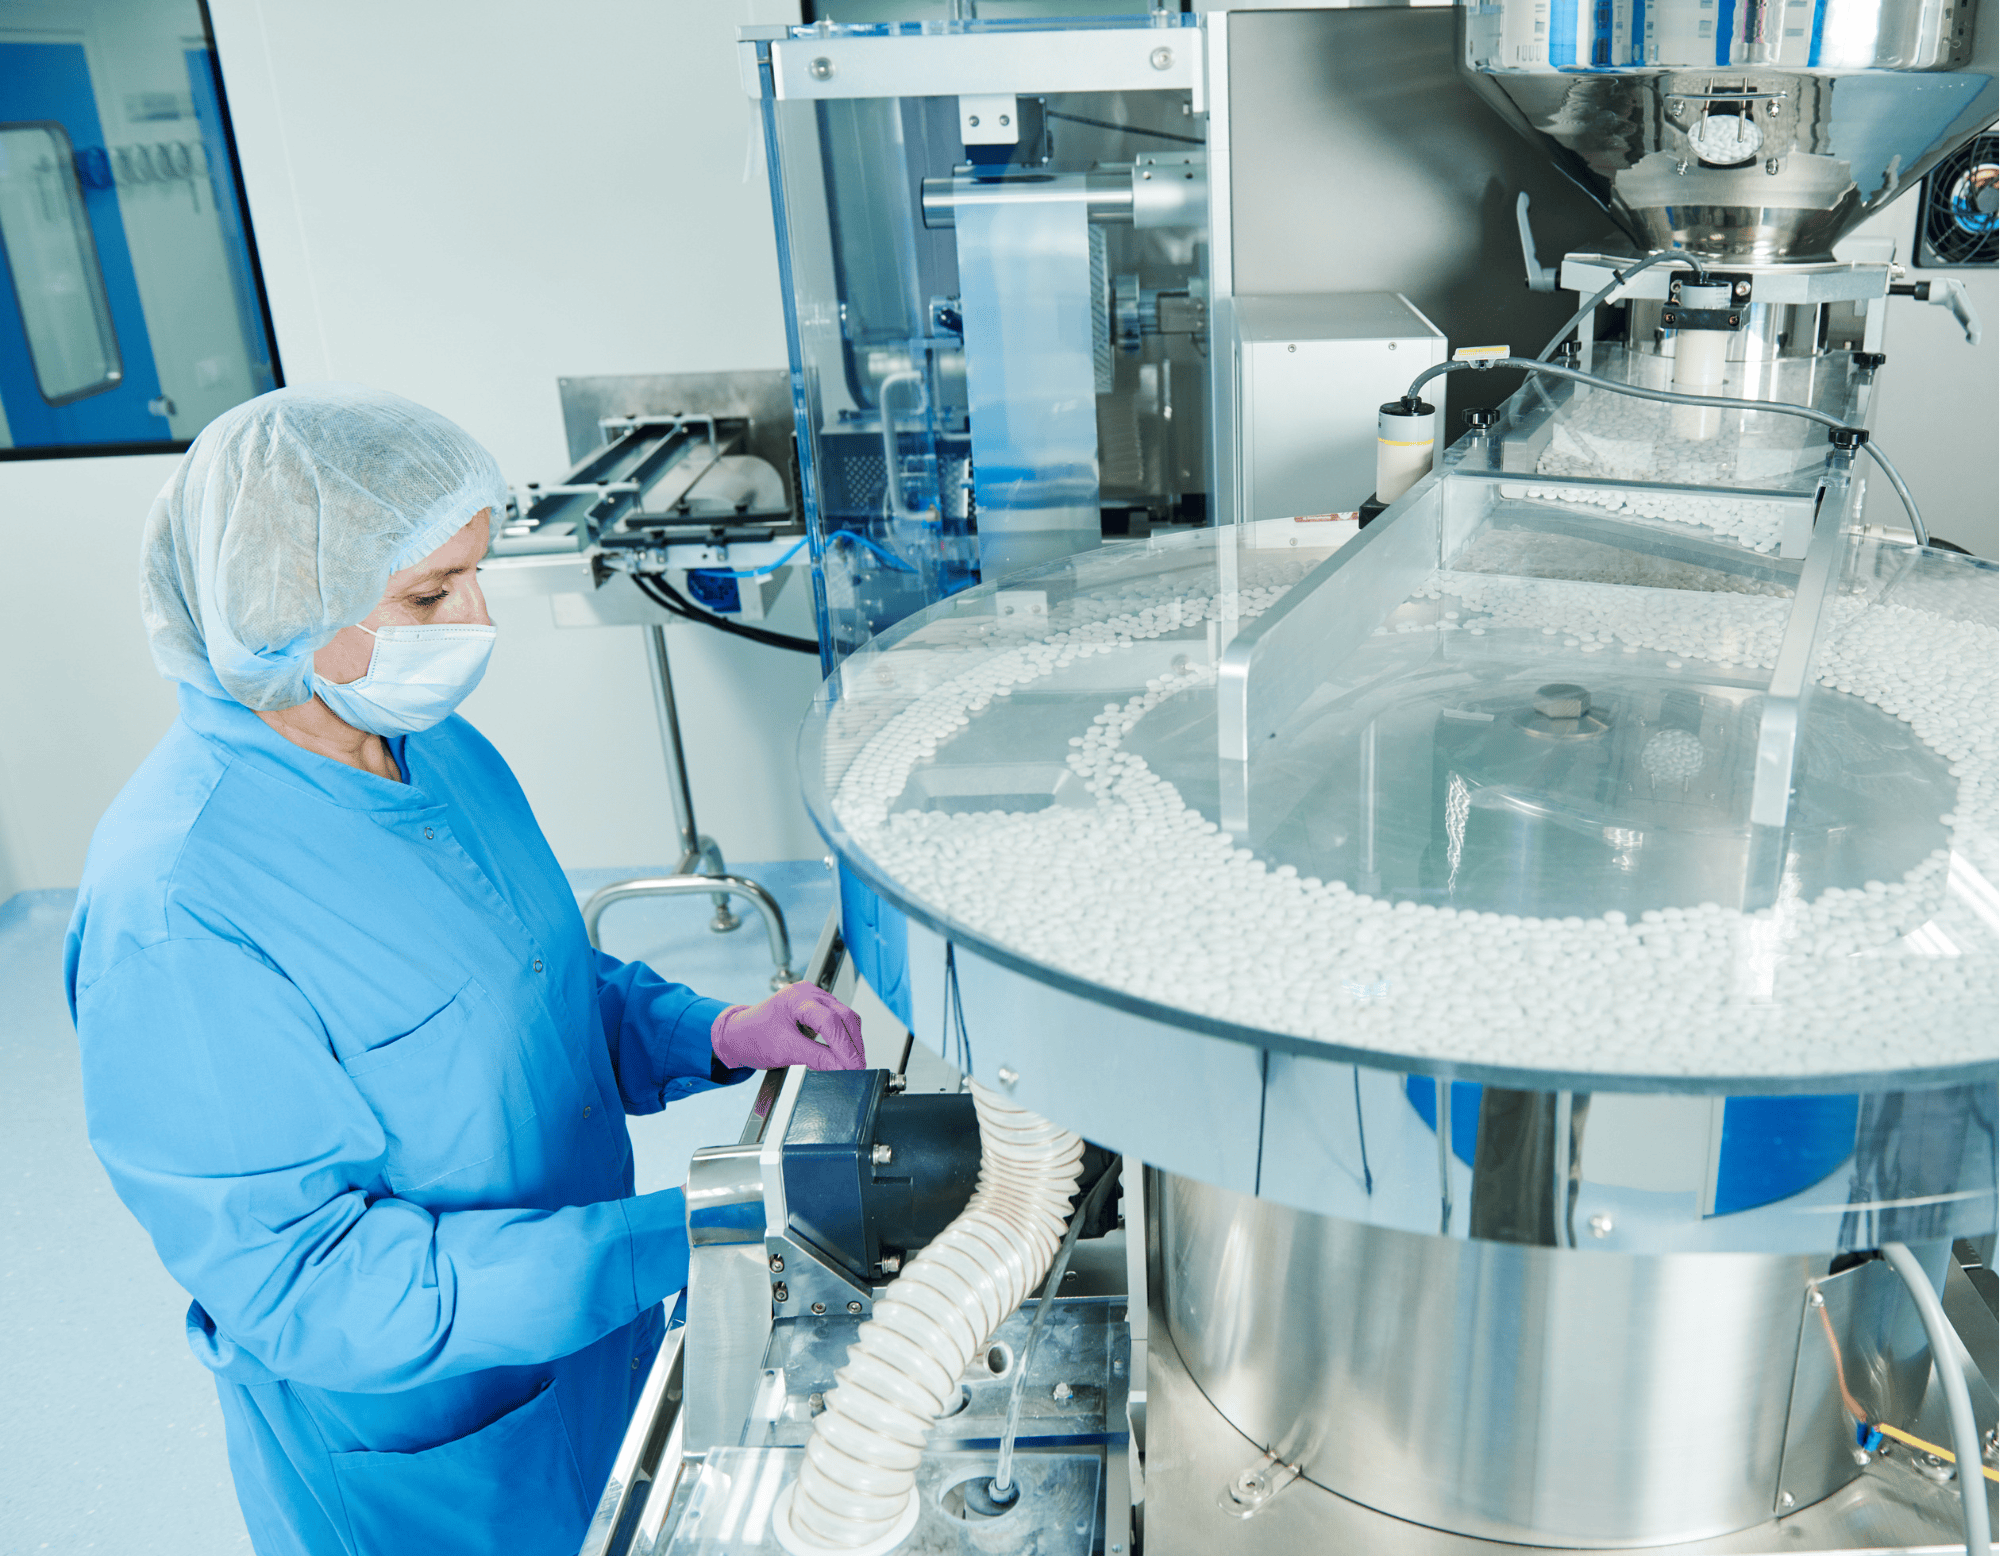 Master 2 Production processes and quality of health products